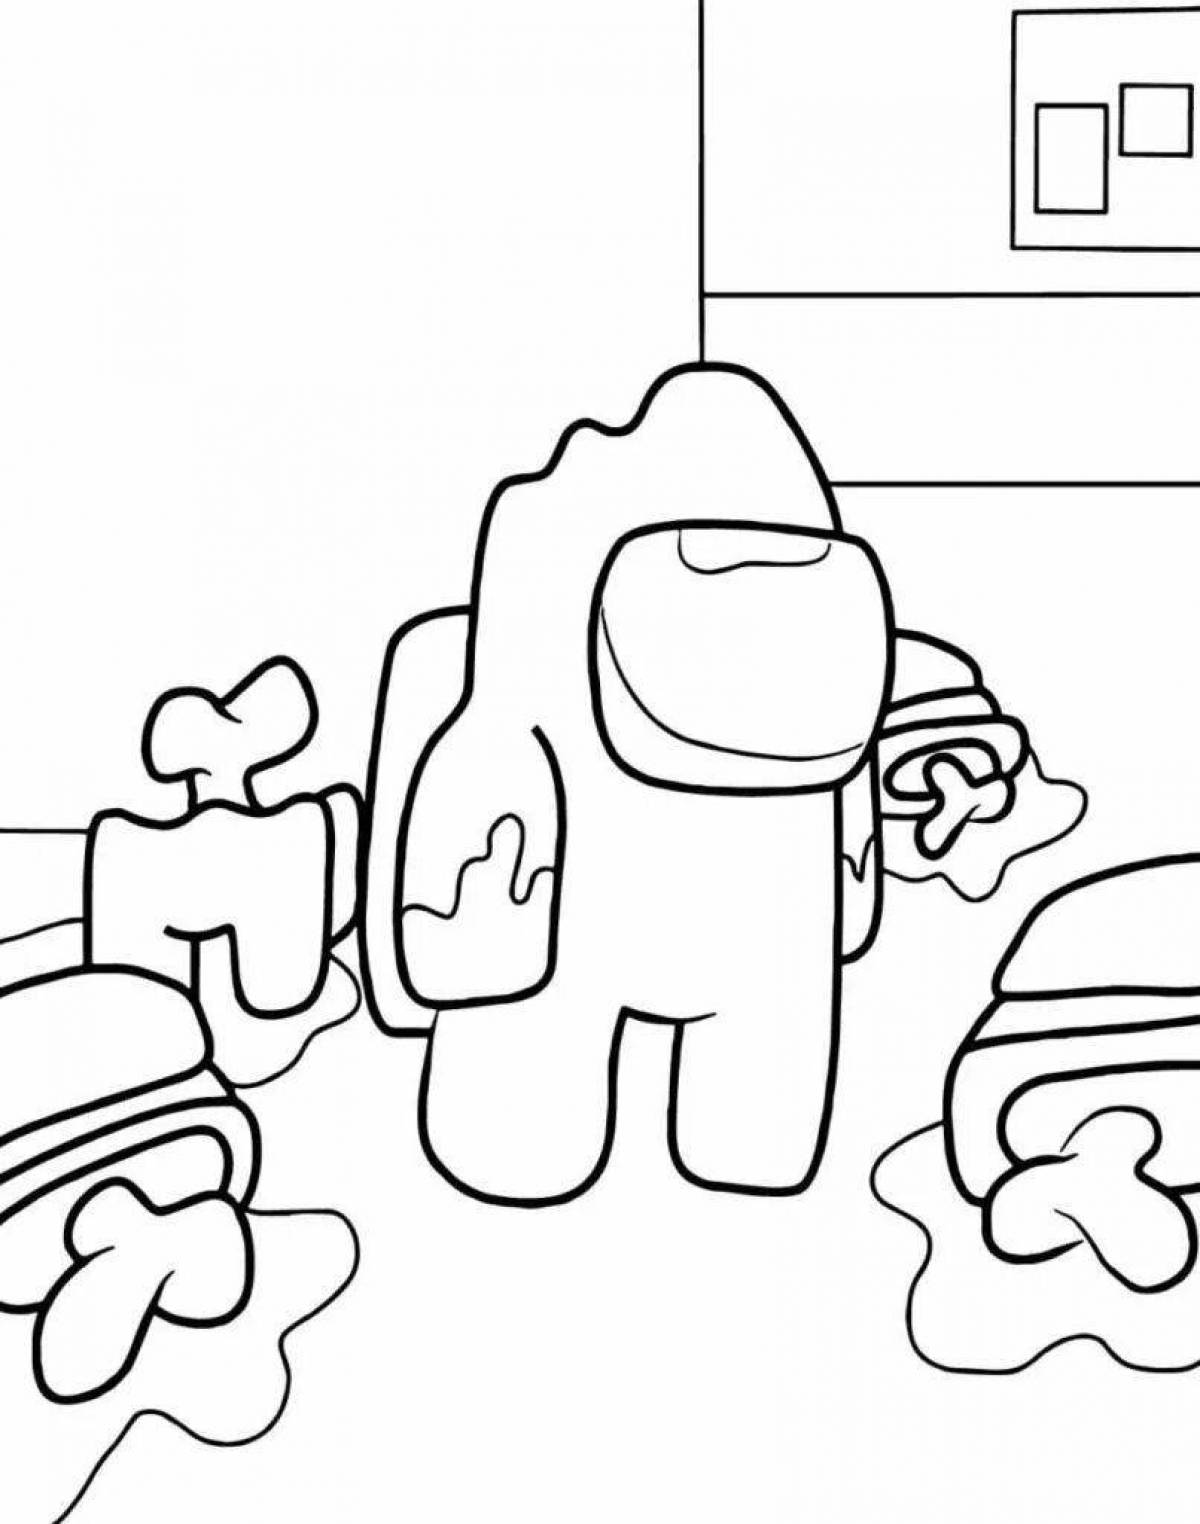 Coloring page cute traitor among us